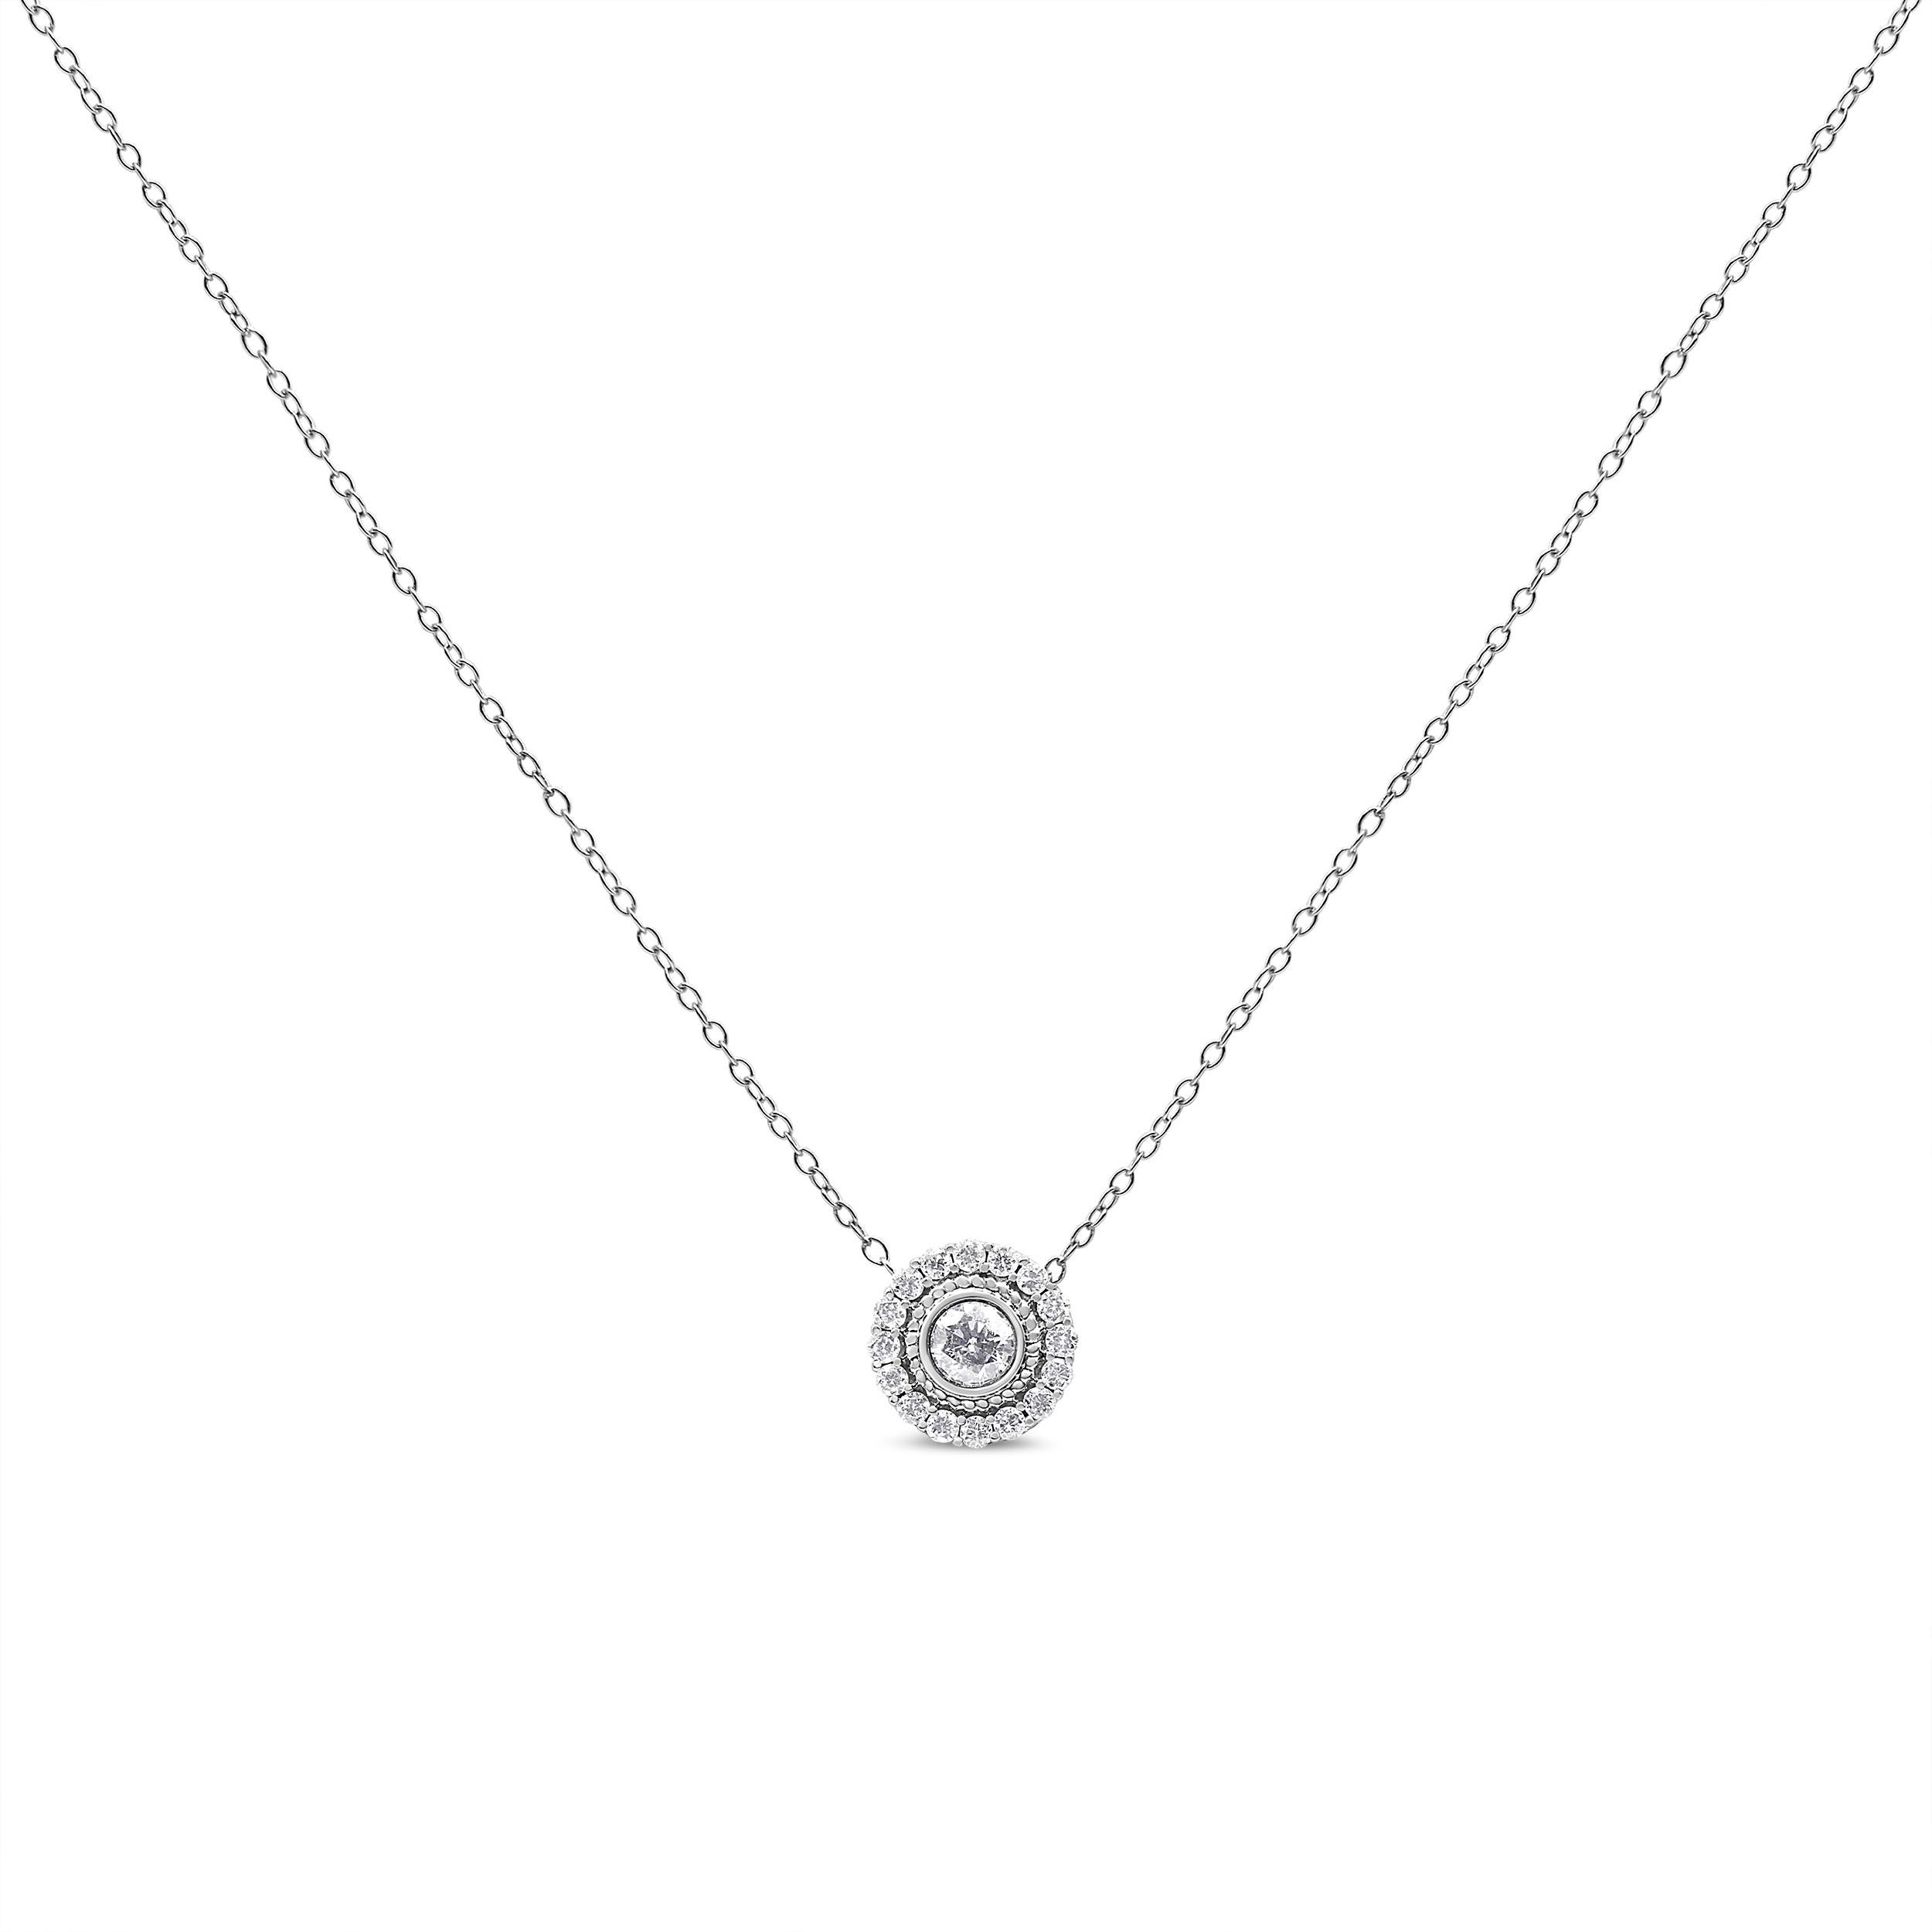 Strike a pose in this alluring diamond halo circle pendant necklace crafted of .925 sterling silver. This piece is a classic beauty, creating instant intrigue with a gorgeous center diamond  nestled in a bezel setting, surrounded by a halo of